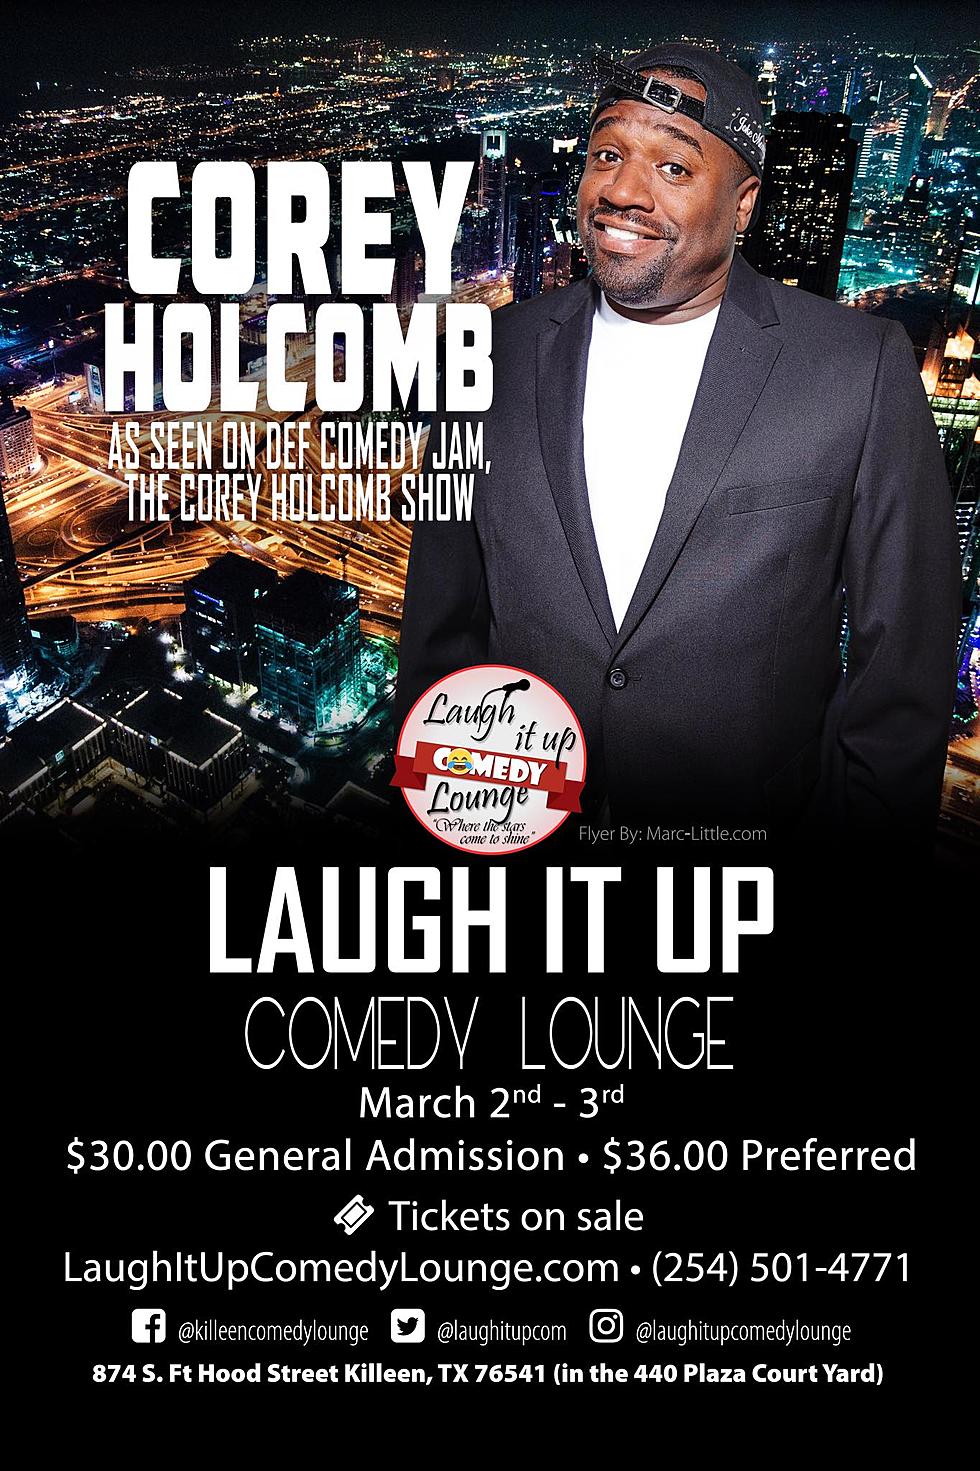 Win Tickets To See Comedian Corey Holcomb This Weekend!